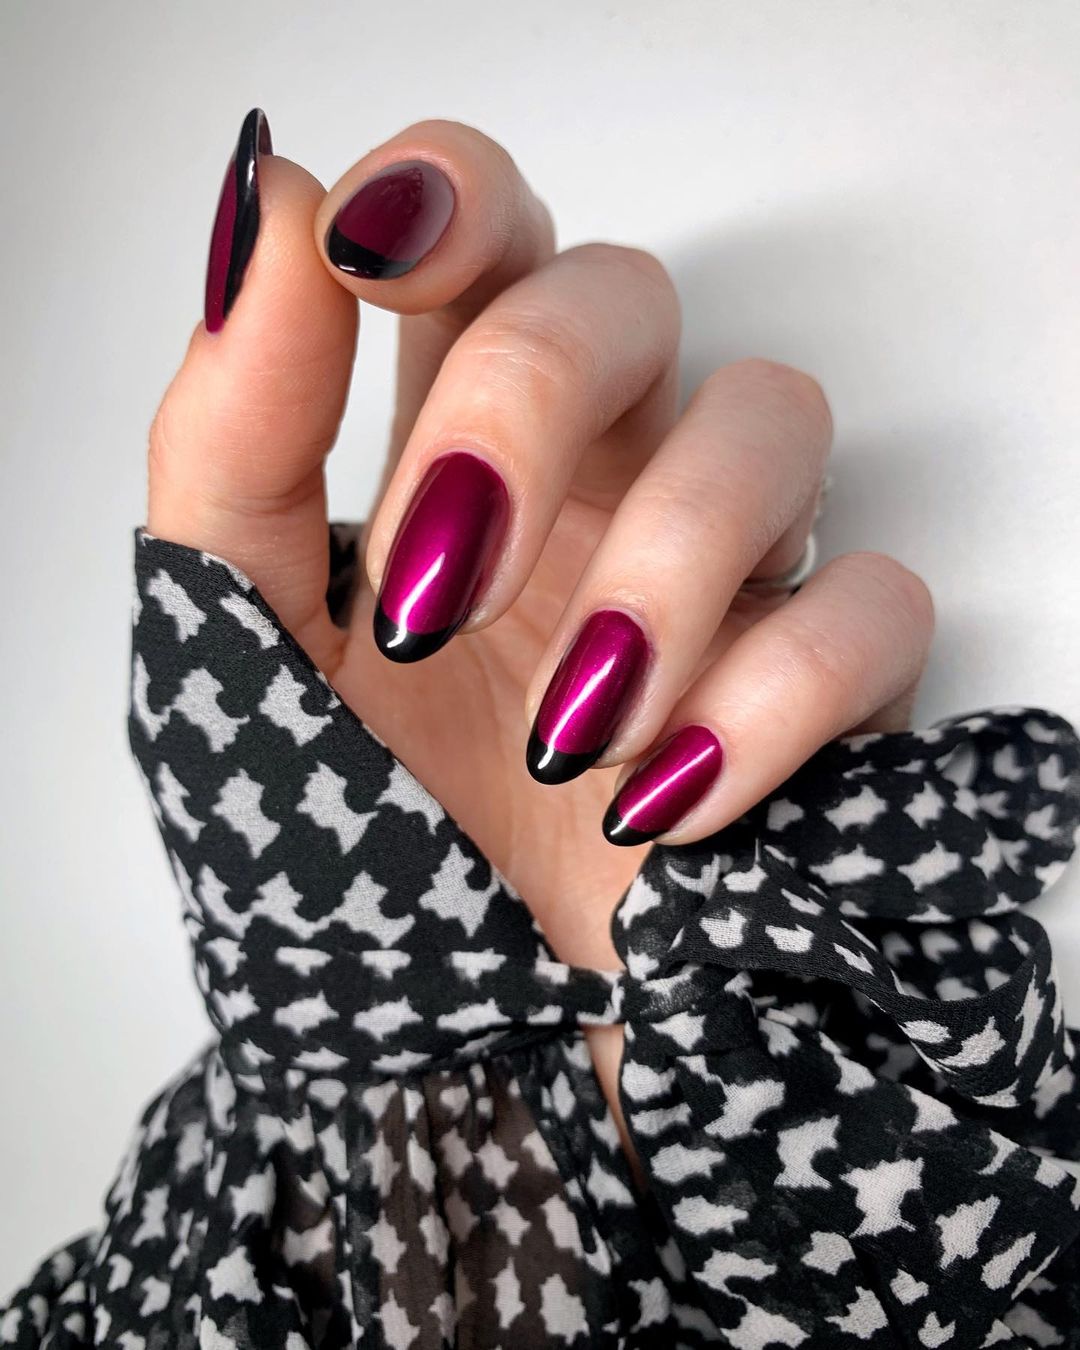 Short Almond Burgundy Nails with Black French Tips